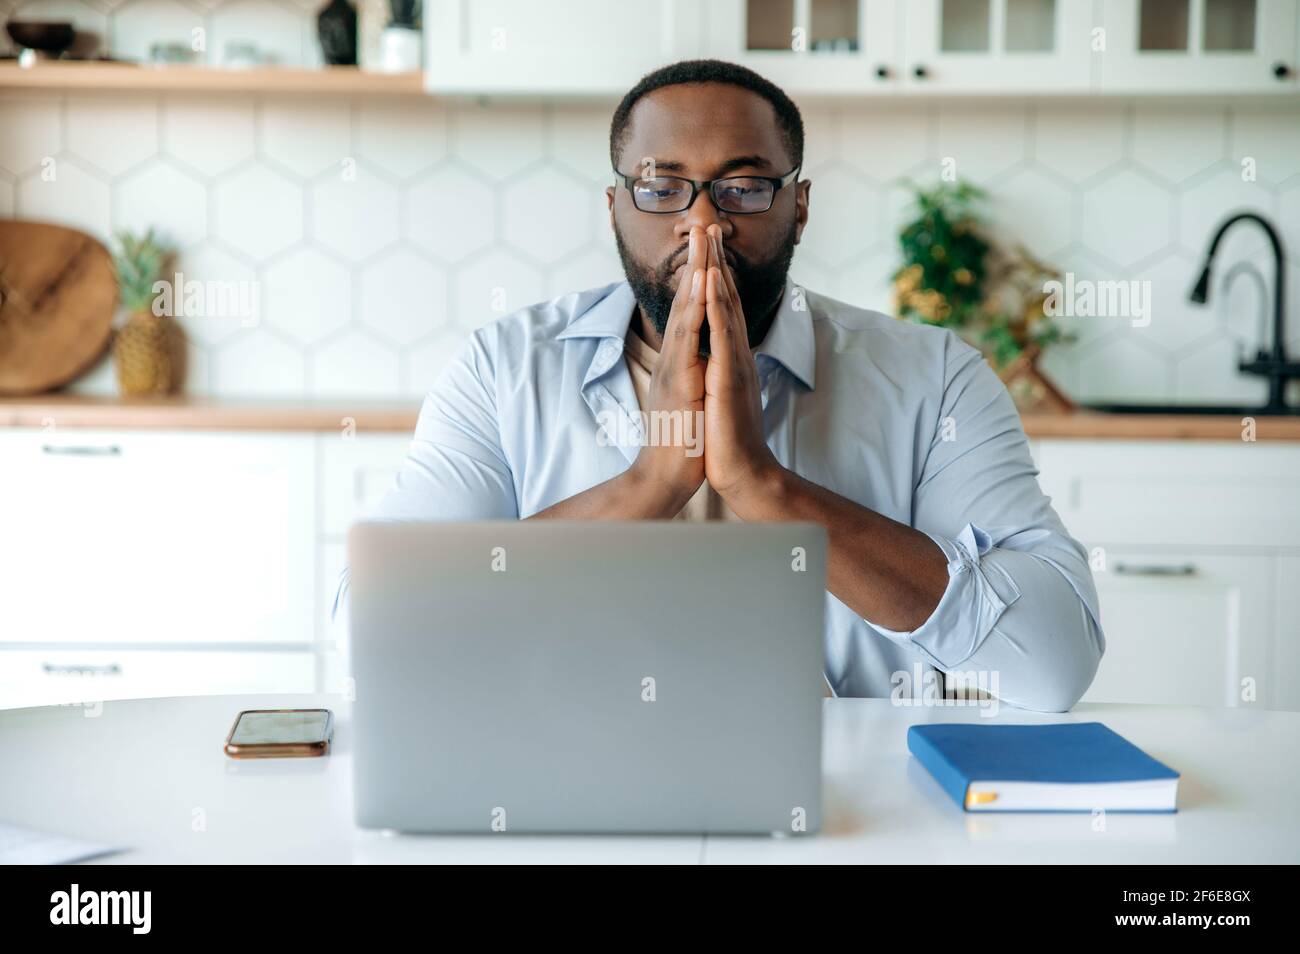 Concentrated business african american man working from home, sitting at work desk, using laptop, looking at laptop thoughtfully, hands near face, thinking about financial business plan or new startup Stock Photo